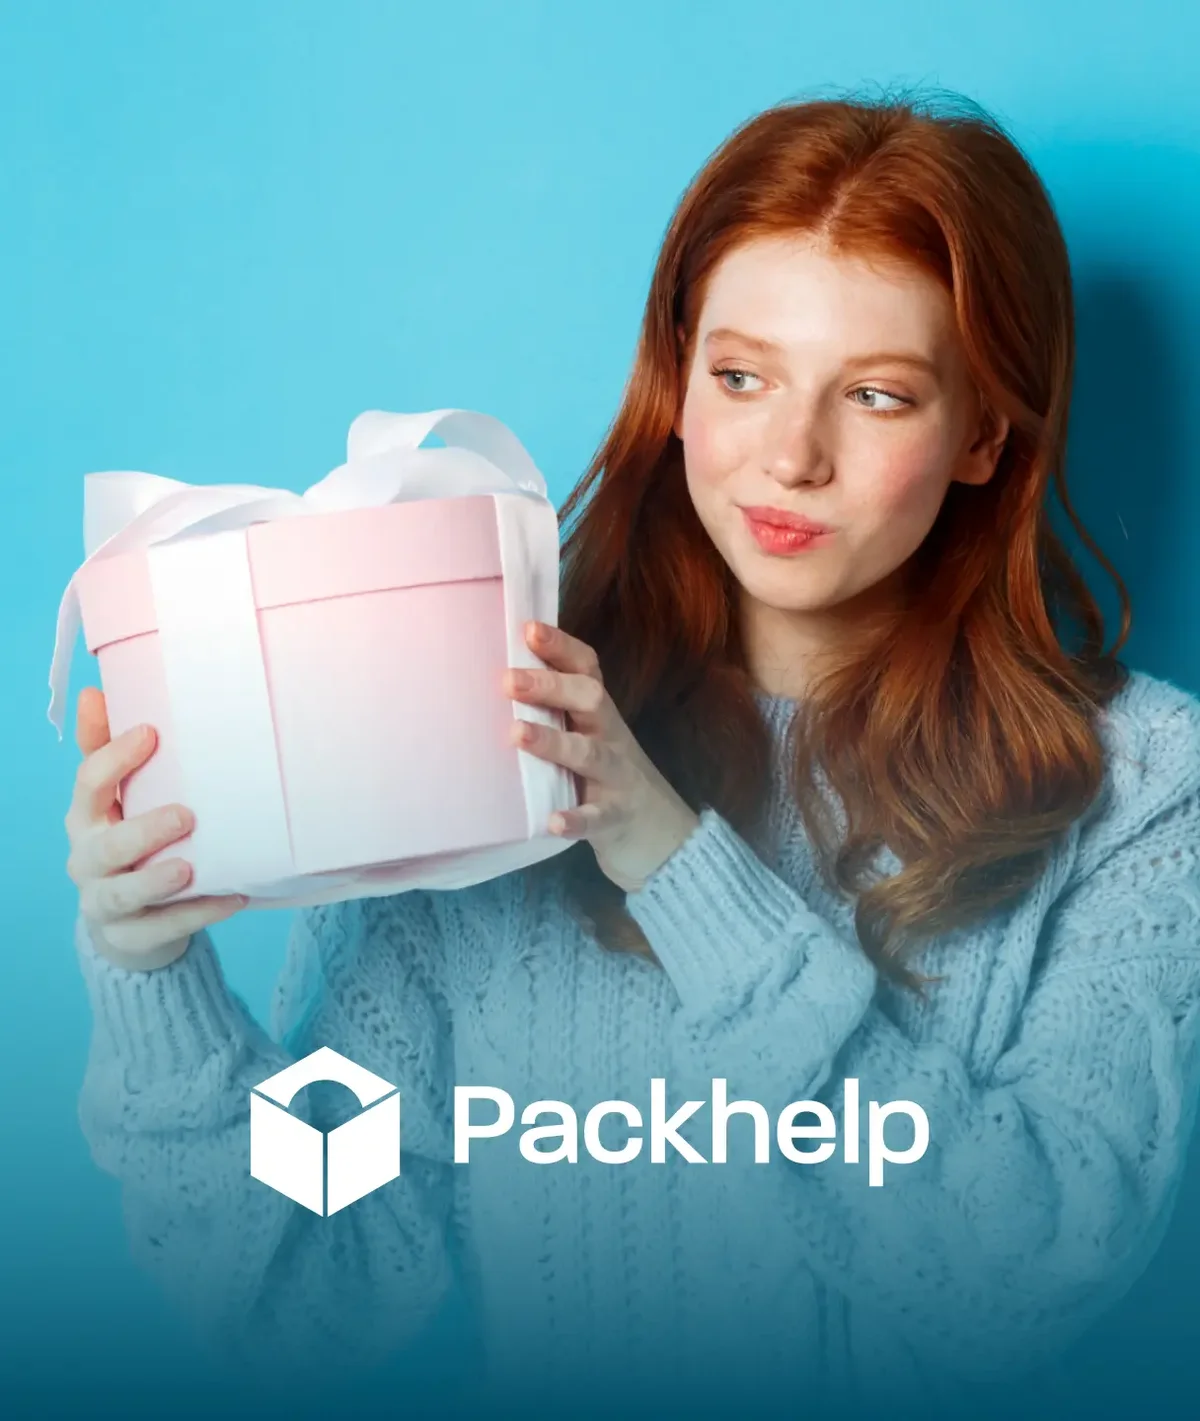 Augmented reality mobile app for Packhelp, marketplace for custom branded packaging